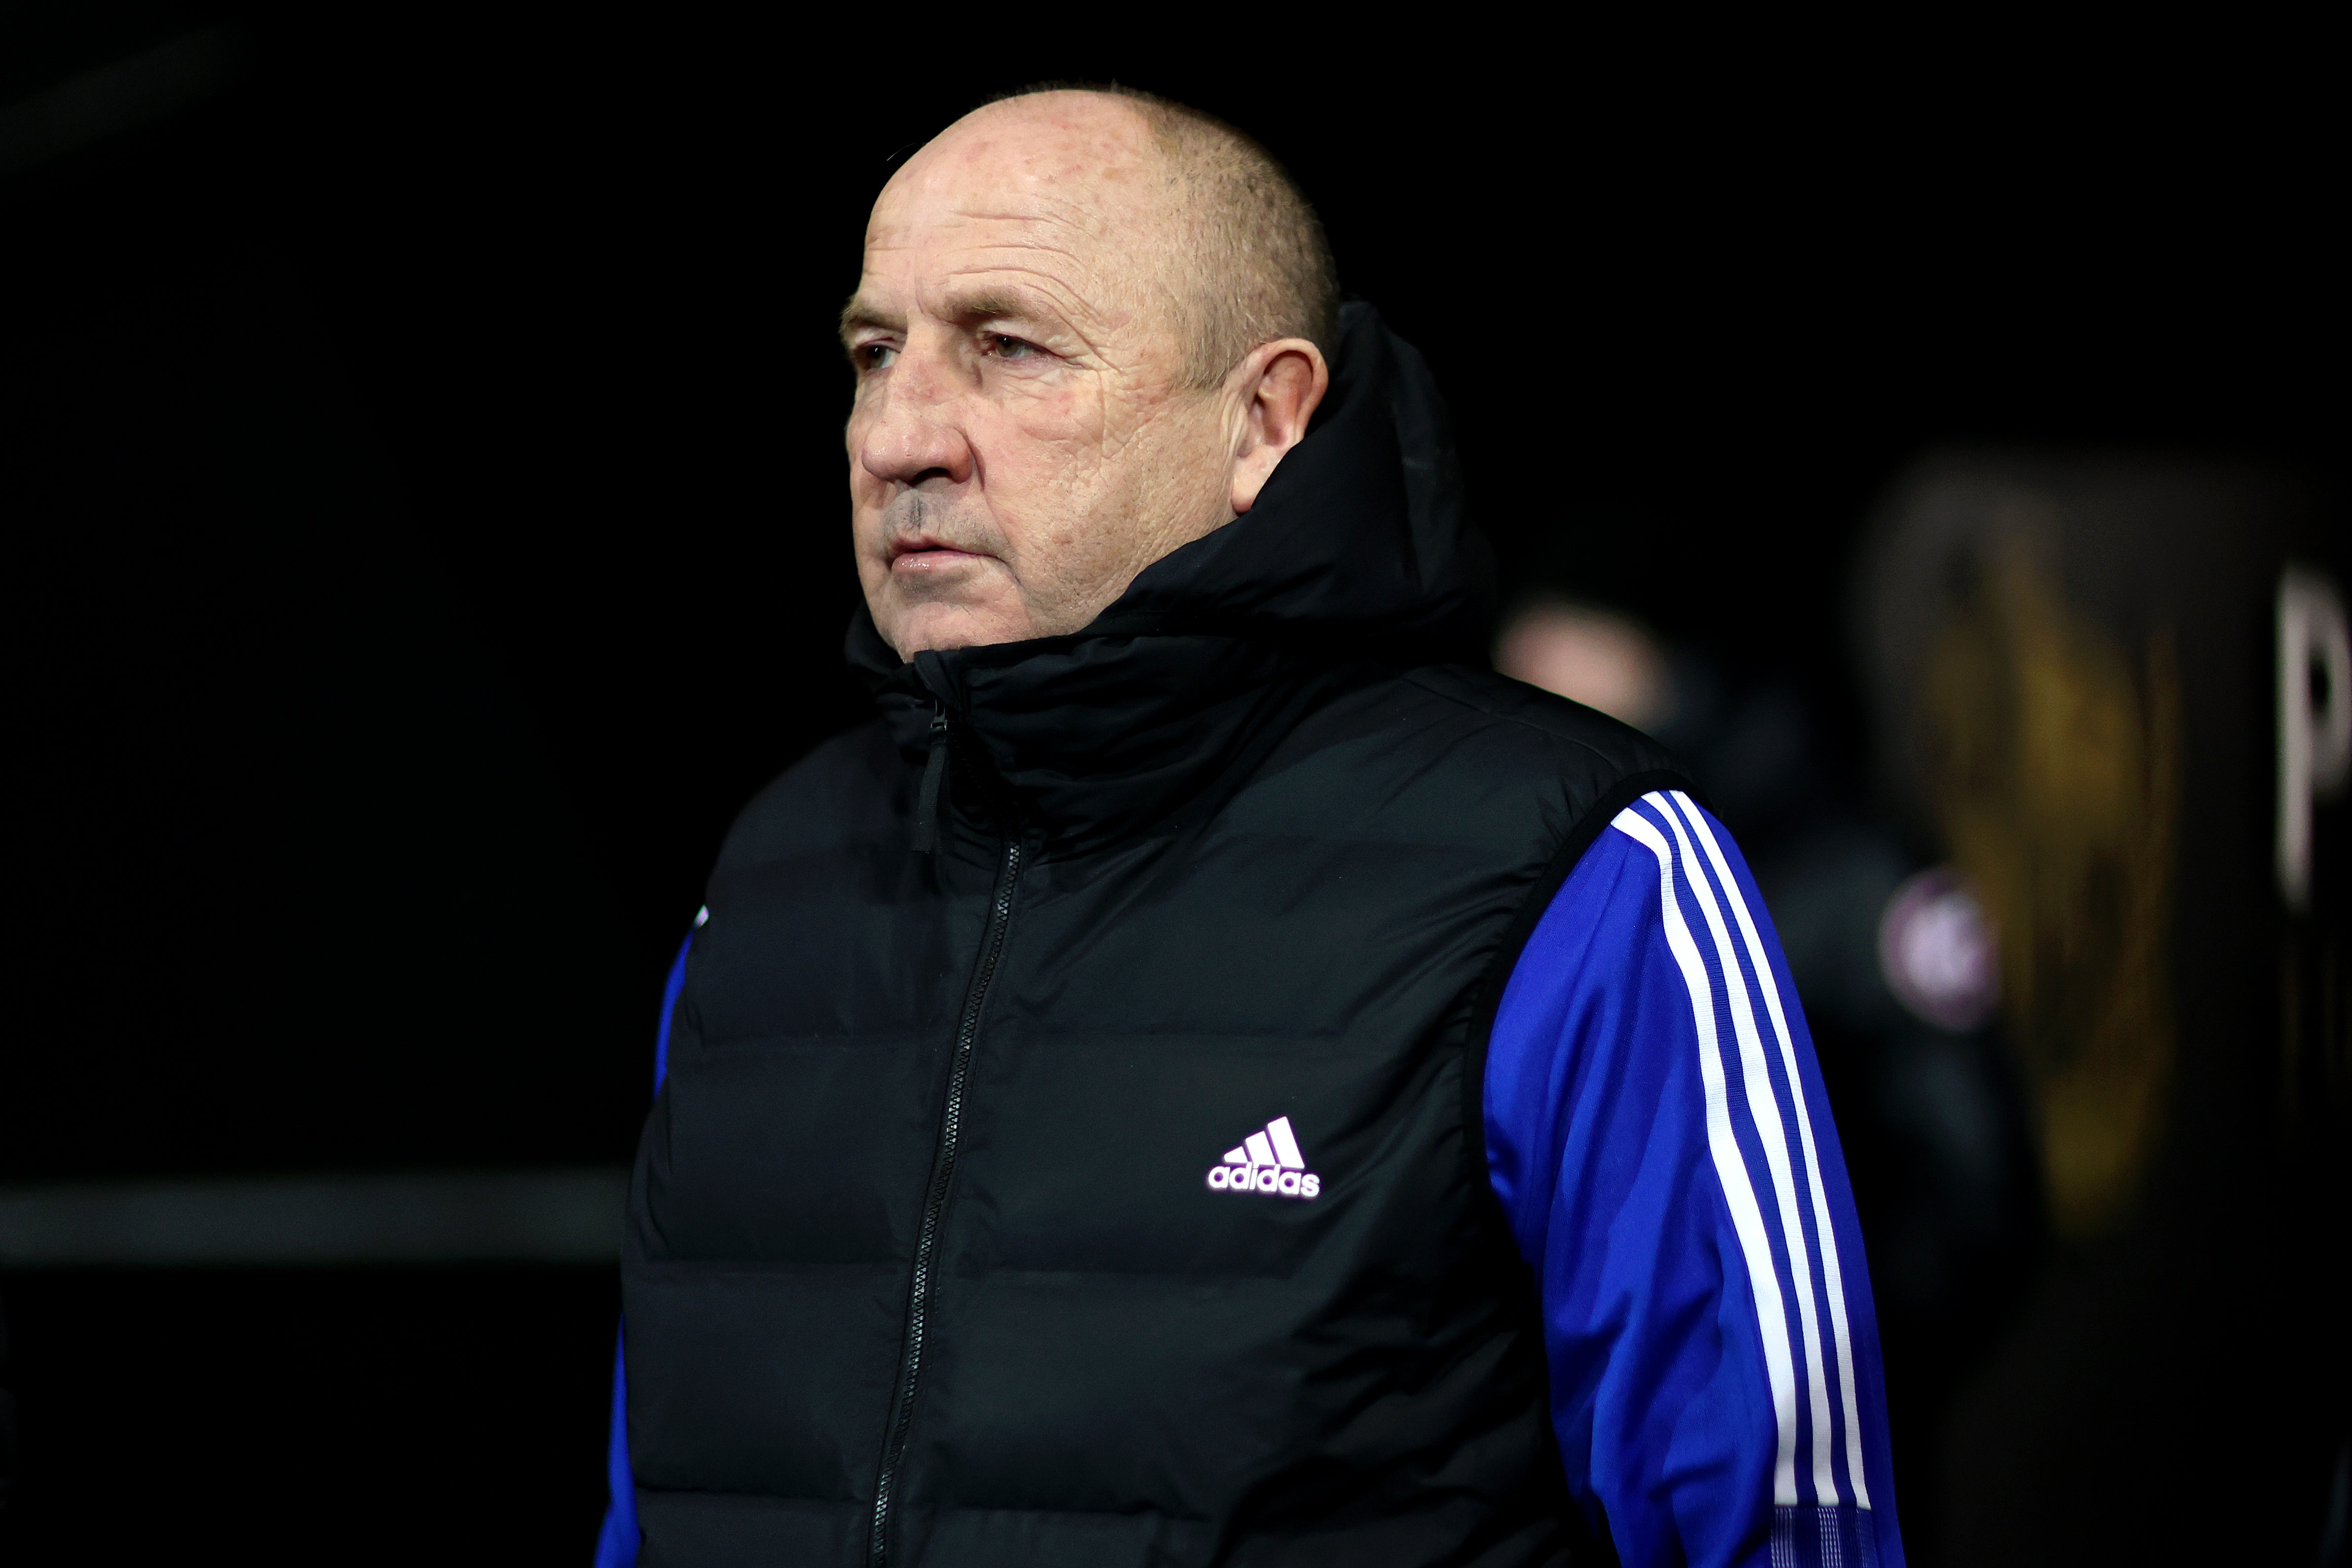 John Coleman was abruptly sacked by Accrington owner Andy Holt last weekend